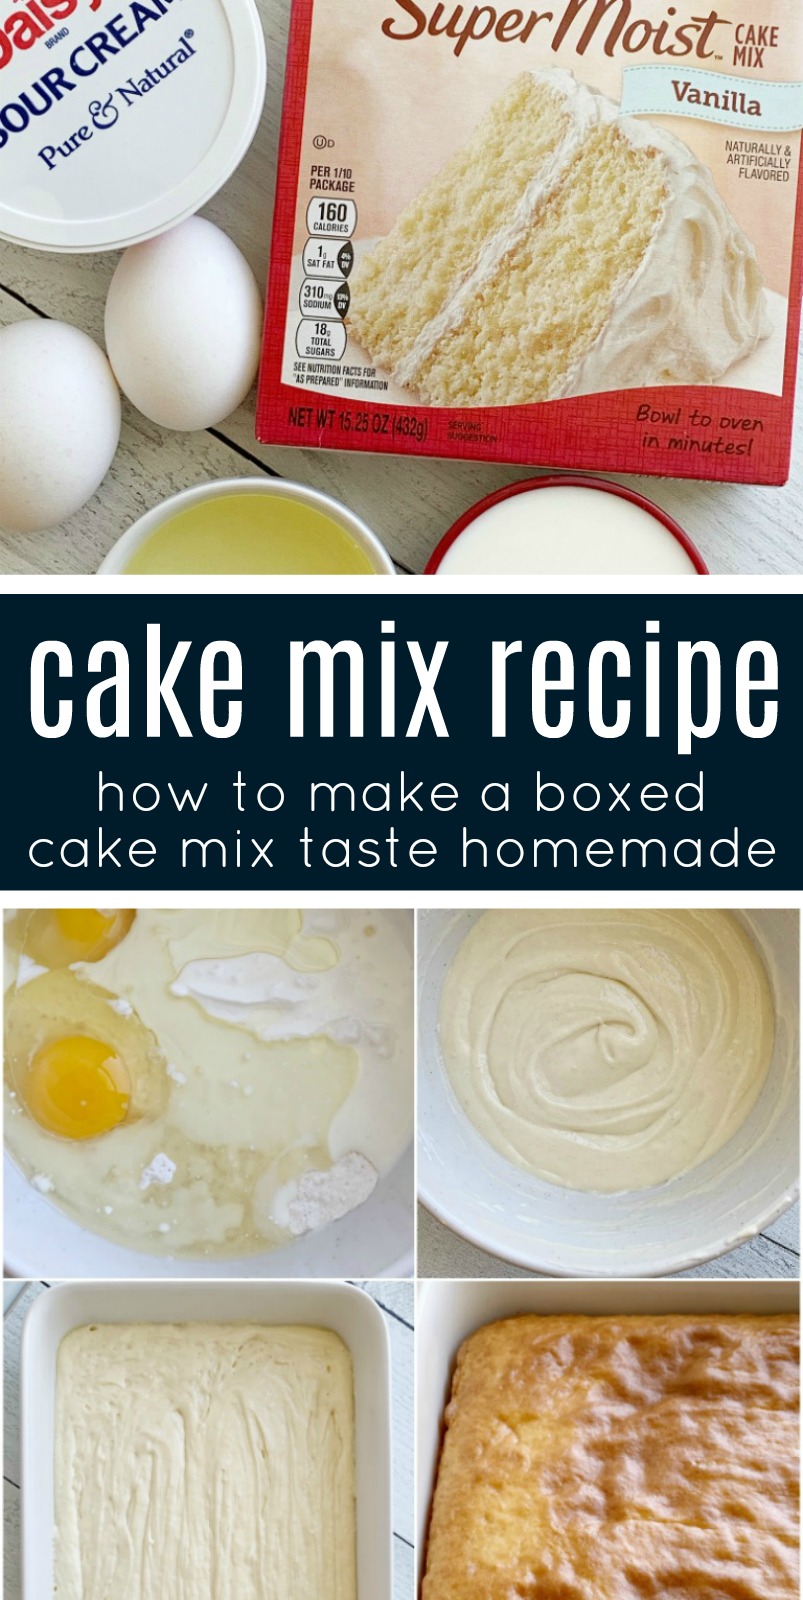 Cake Mix Recipe | Doctored Up Boxed Cake Mix | Cake Recipe | Boxed Cake Mix Hack | Love the convenience of a boxed cake mix but want it to taste richer and homemade? Then you will love this Cake Mix Recipe which will turn any boxed cake mix into a deliciously moist and rich cake that tastes like it came from an expensive bakery. #cake #easyrecipe #cakerecipes #boxedcakemixrecipes #cakemix #recipeoftheday